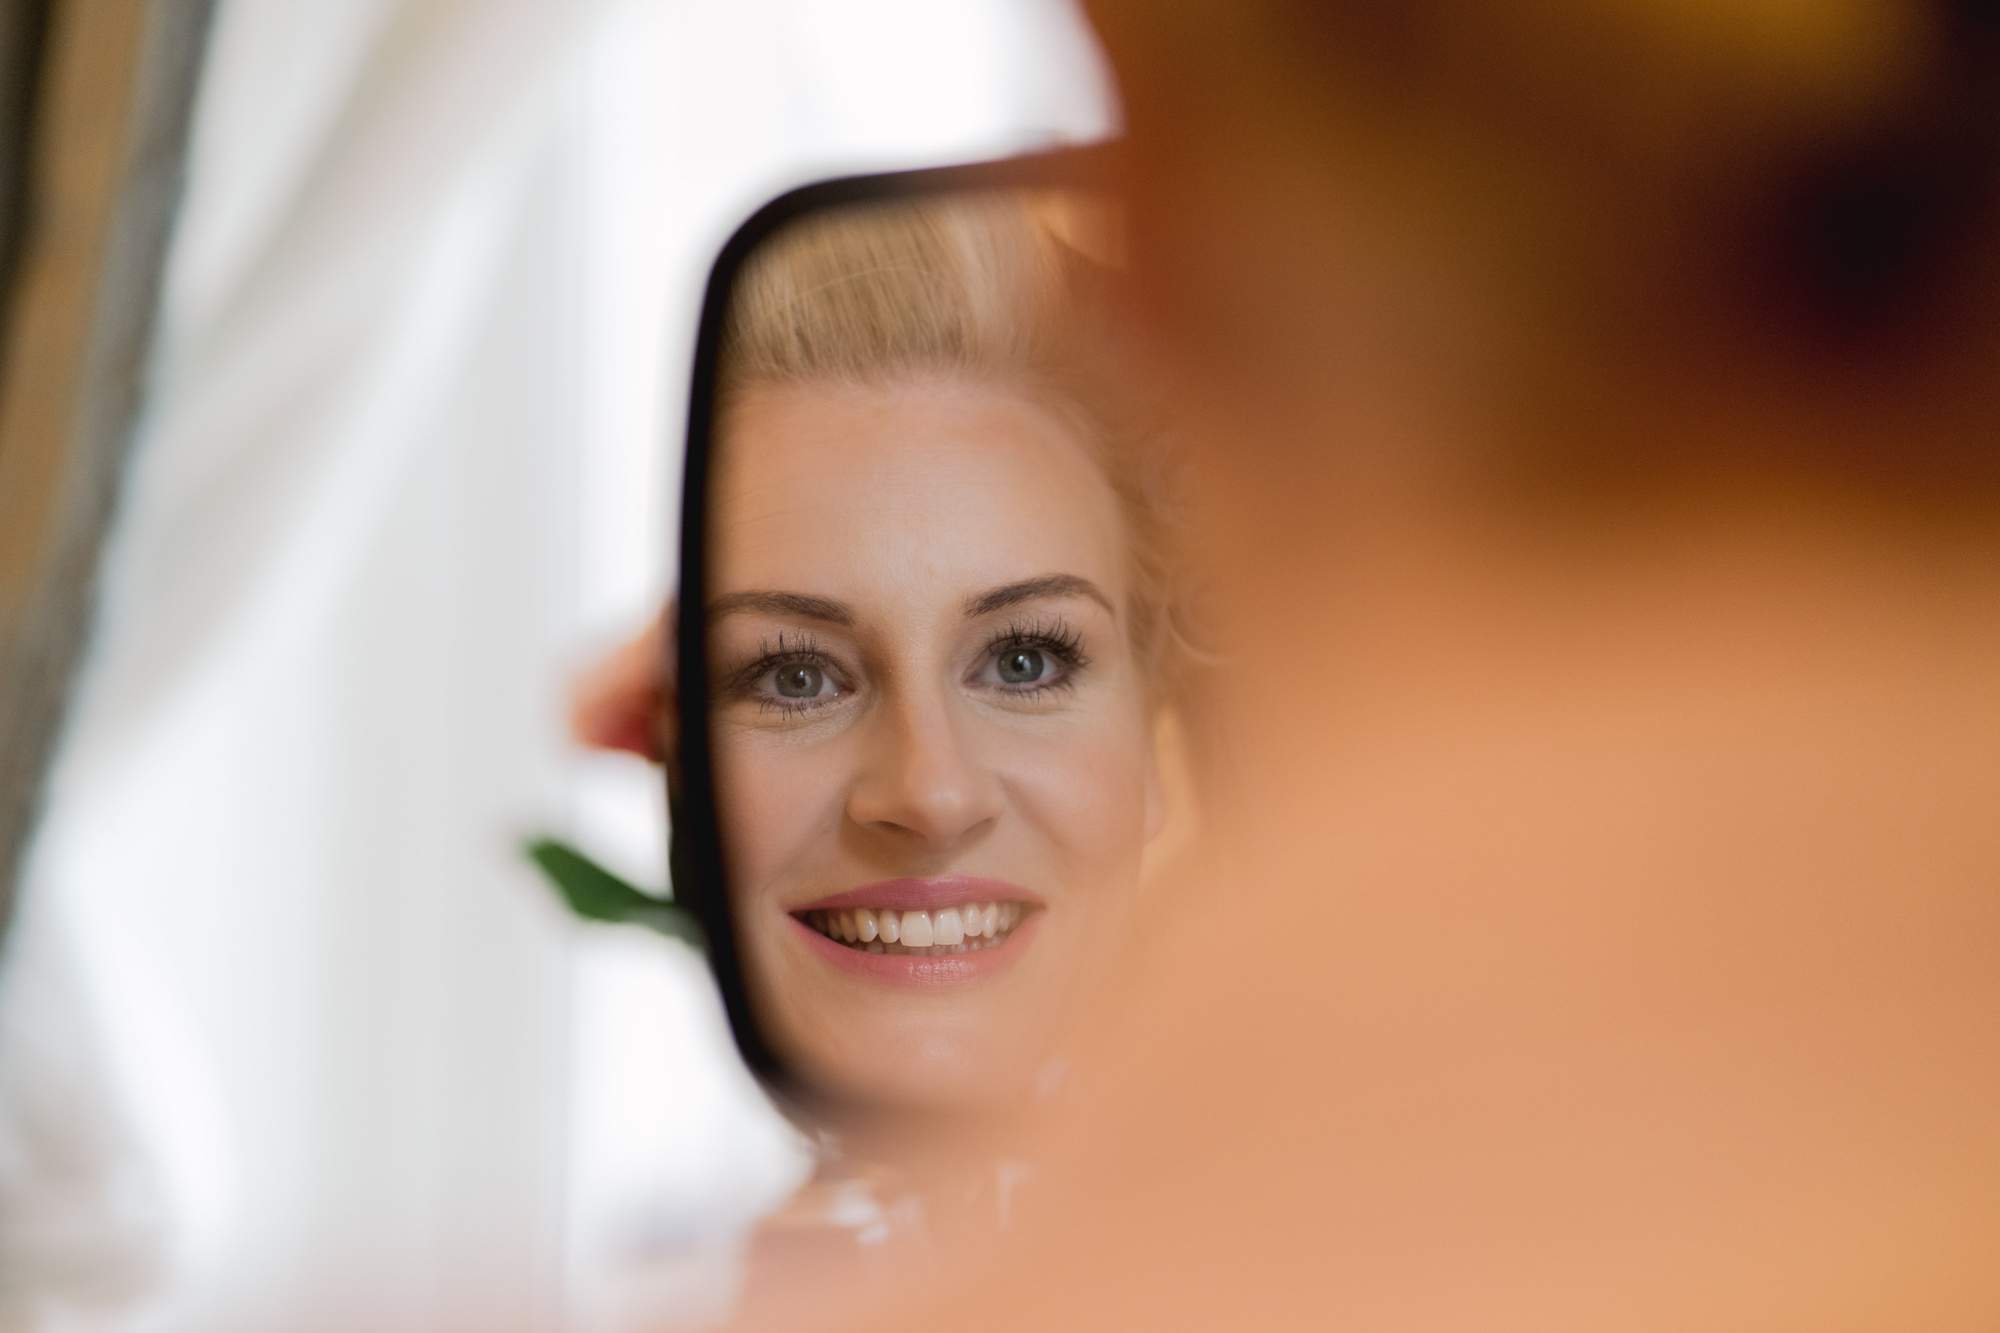 A bride smiling in the mirror on her wedding day at the Ritz hotel in London.